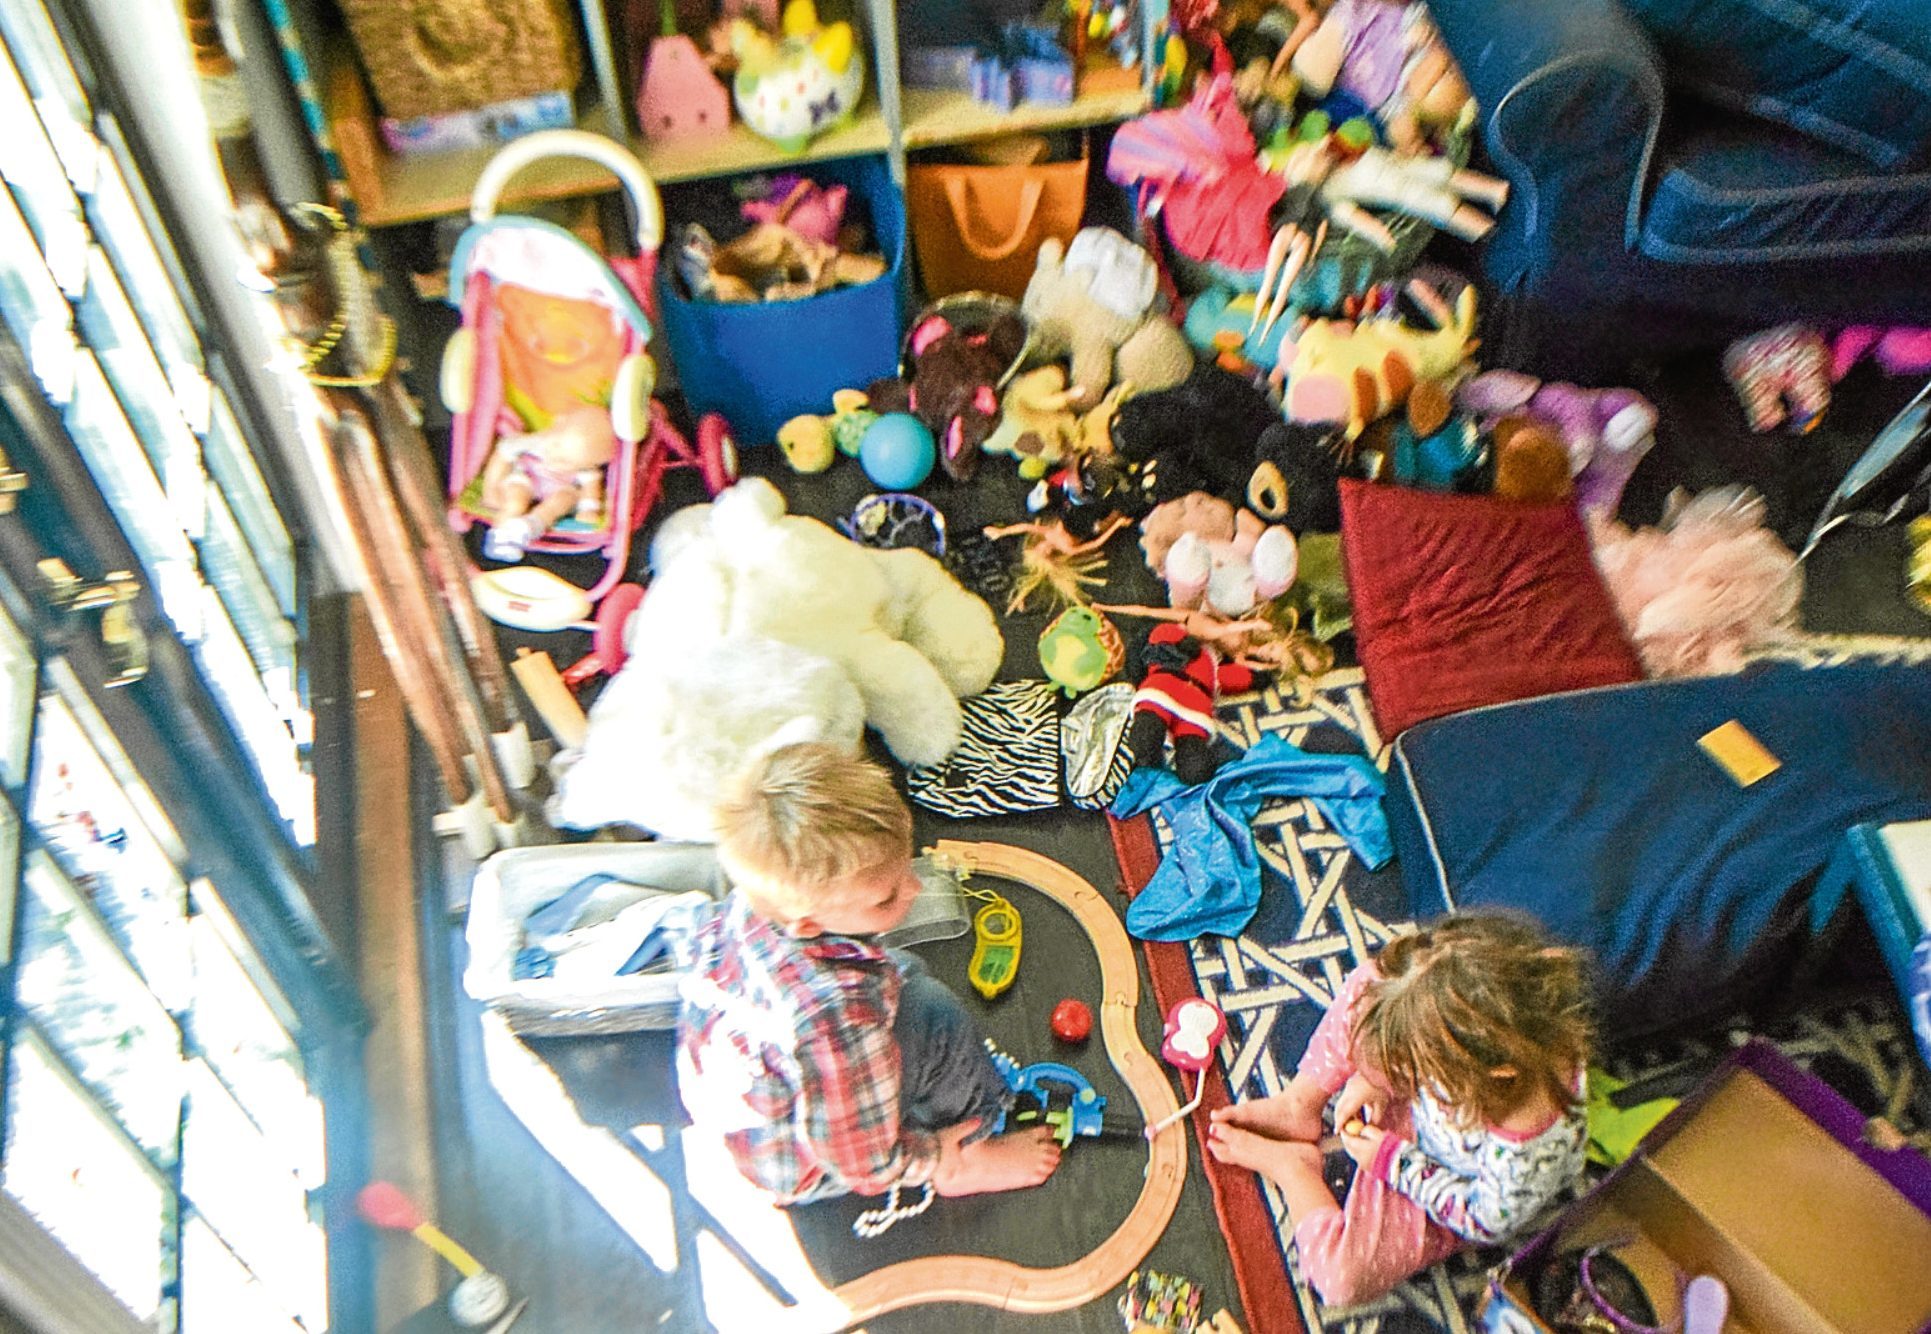 Children playing, making a mess